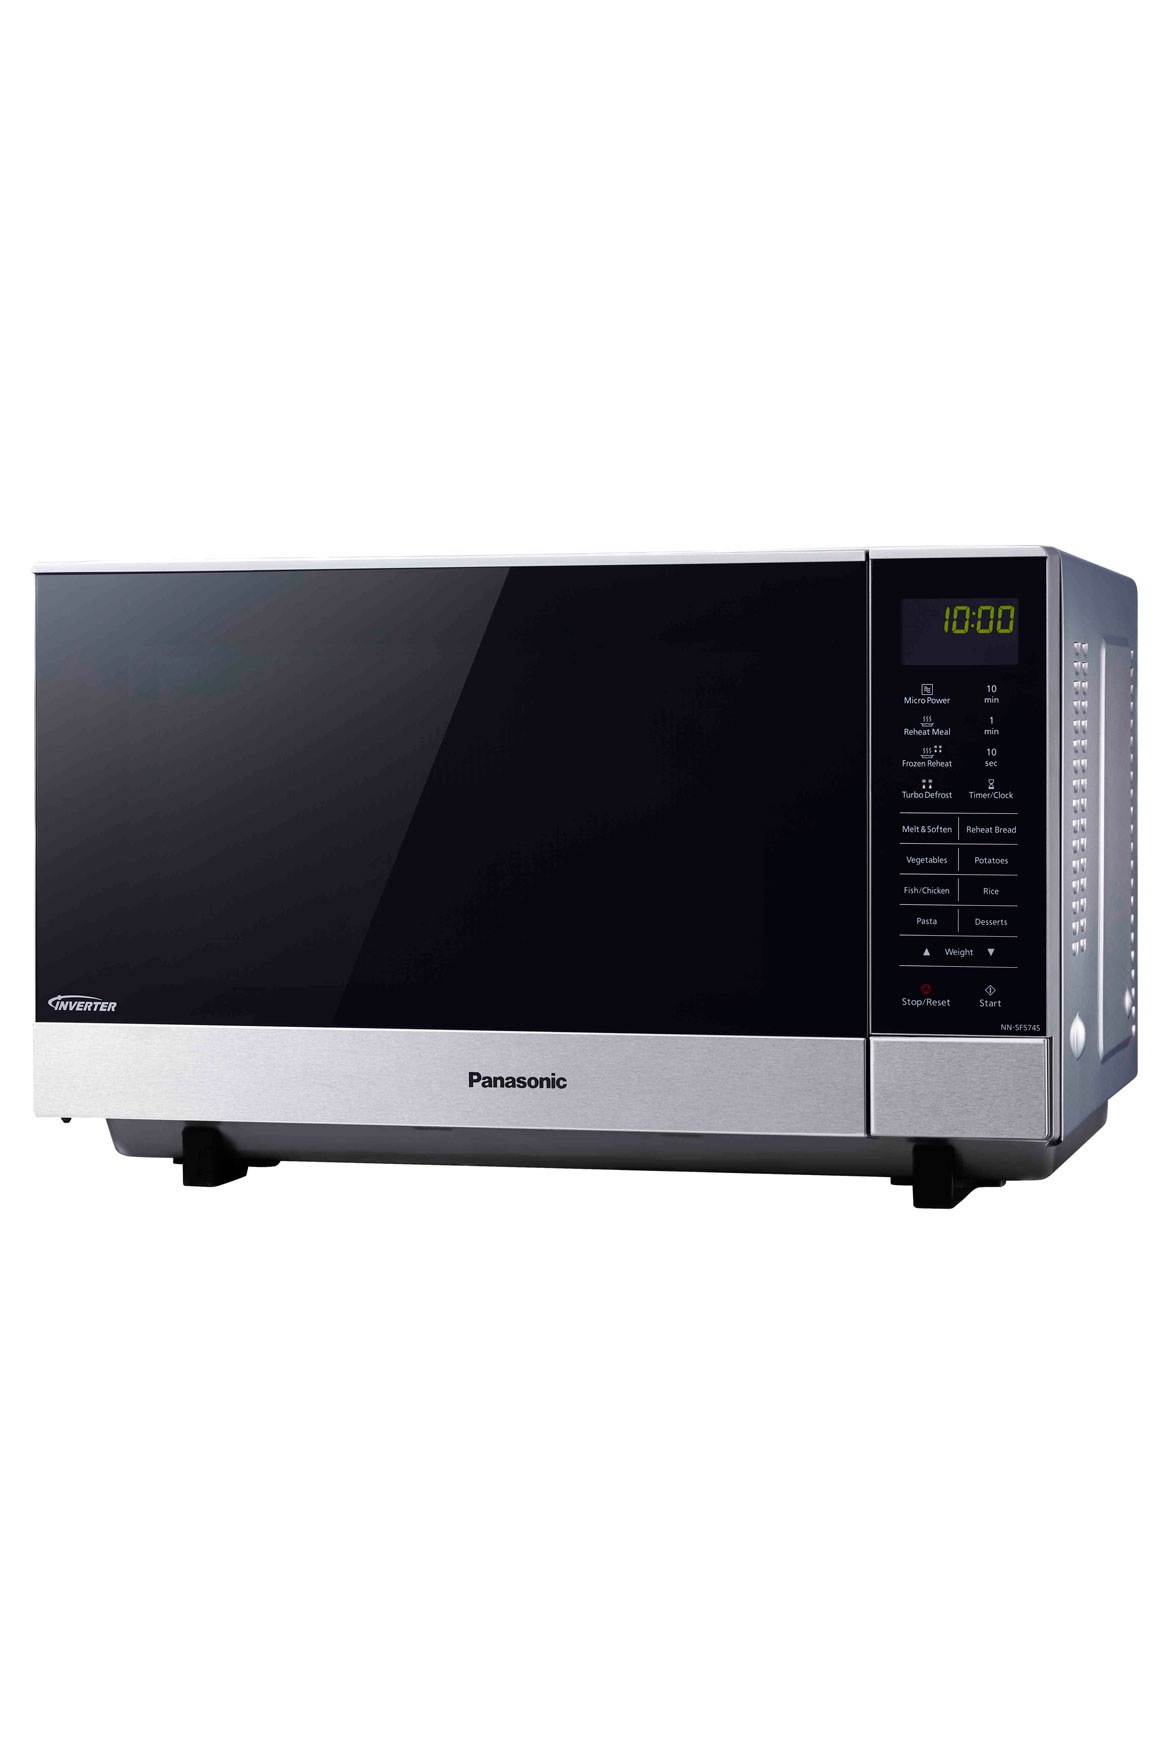 Panasonic | NN-SF574SQPQ Flatbed Inverter Microwave Oven: Stainless